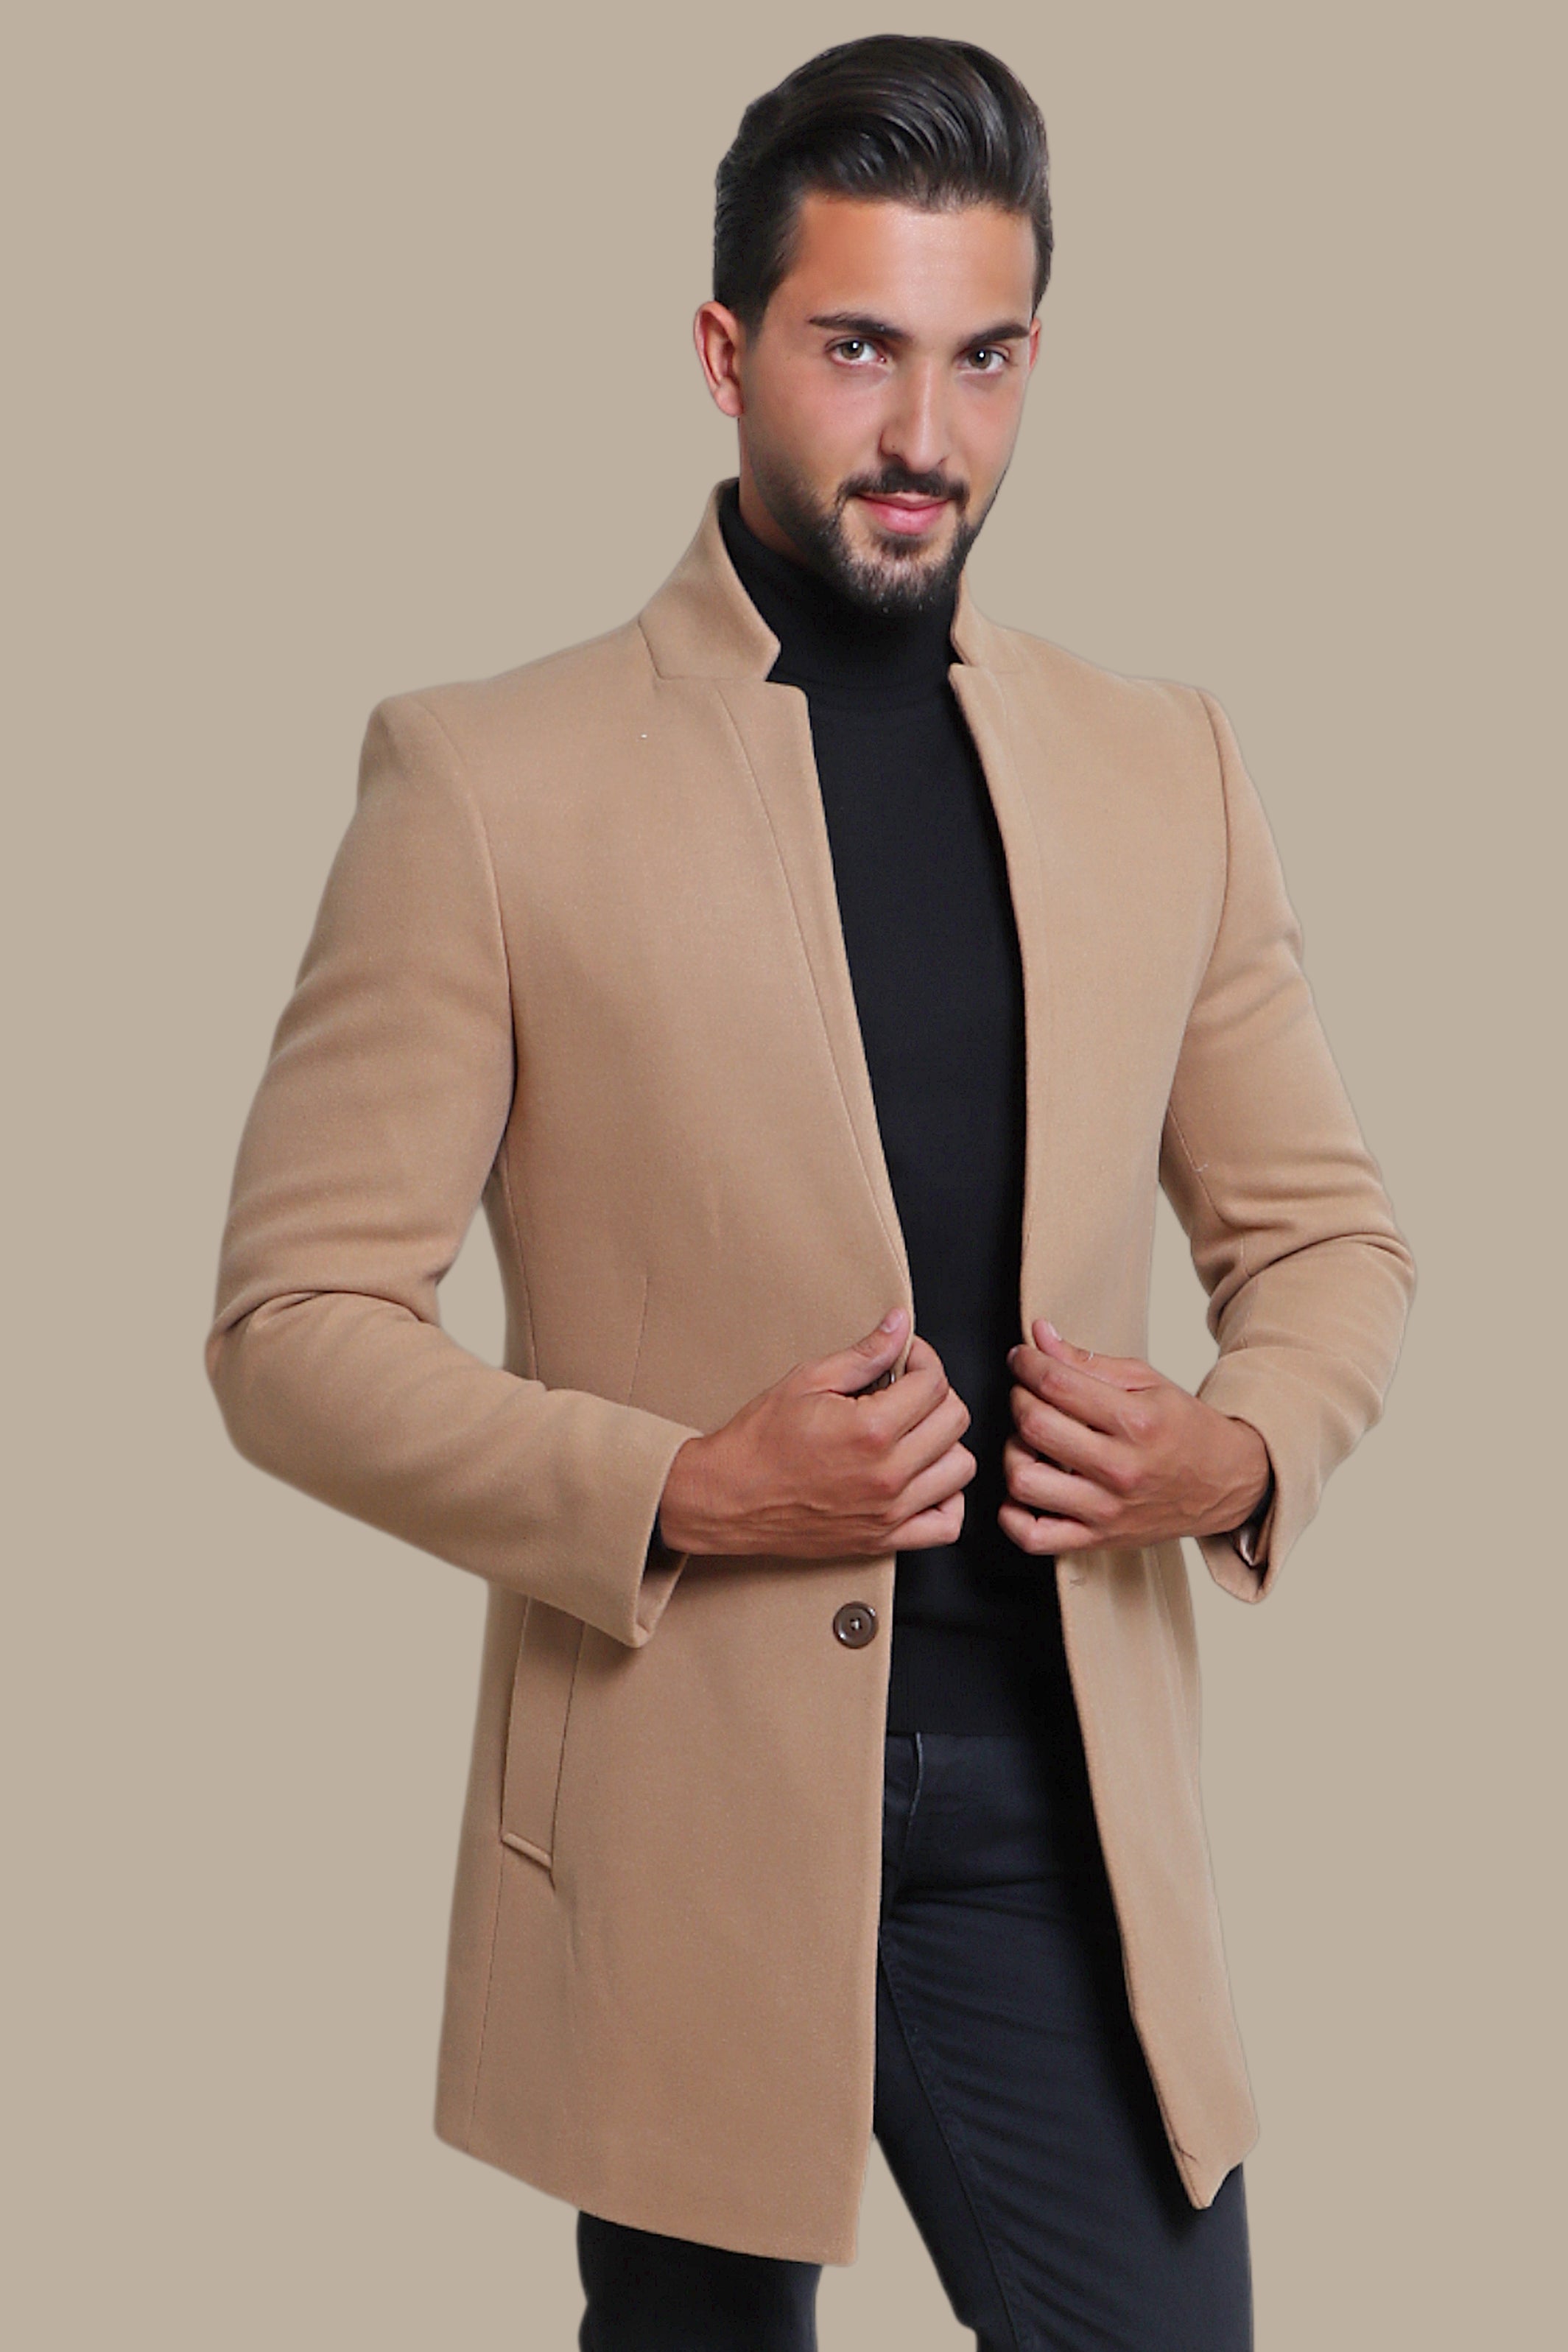 Timeless Beige Chic: The Classic Coat Col Mao in Neutral Elegance